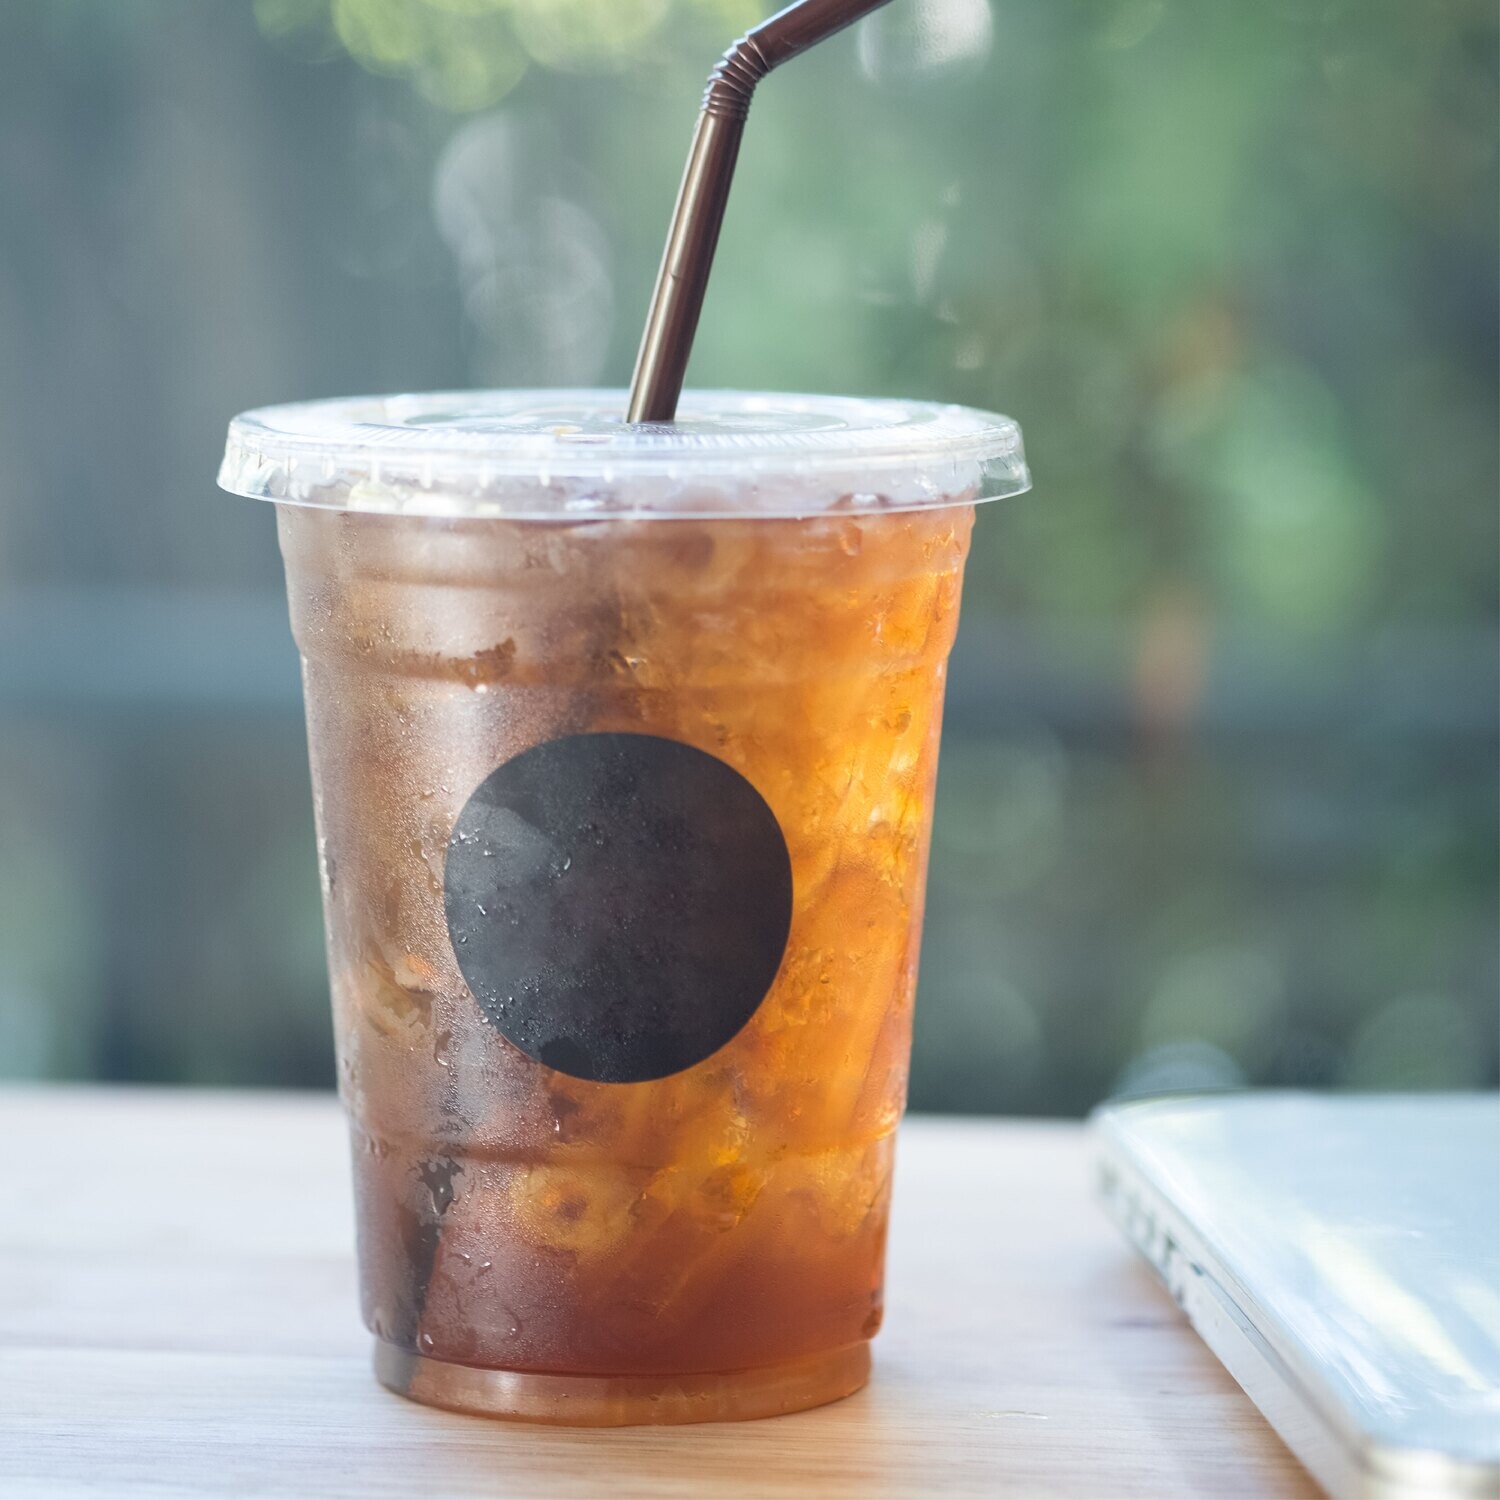 16 oz Iced Tea Made to order